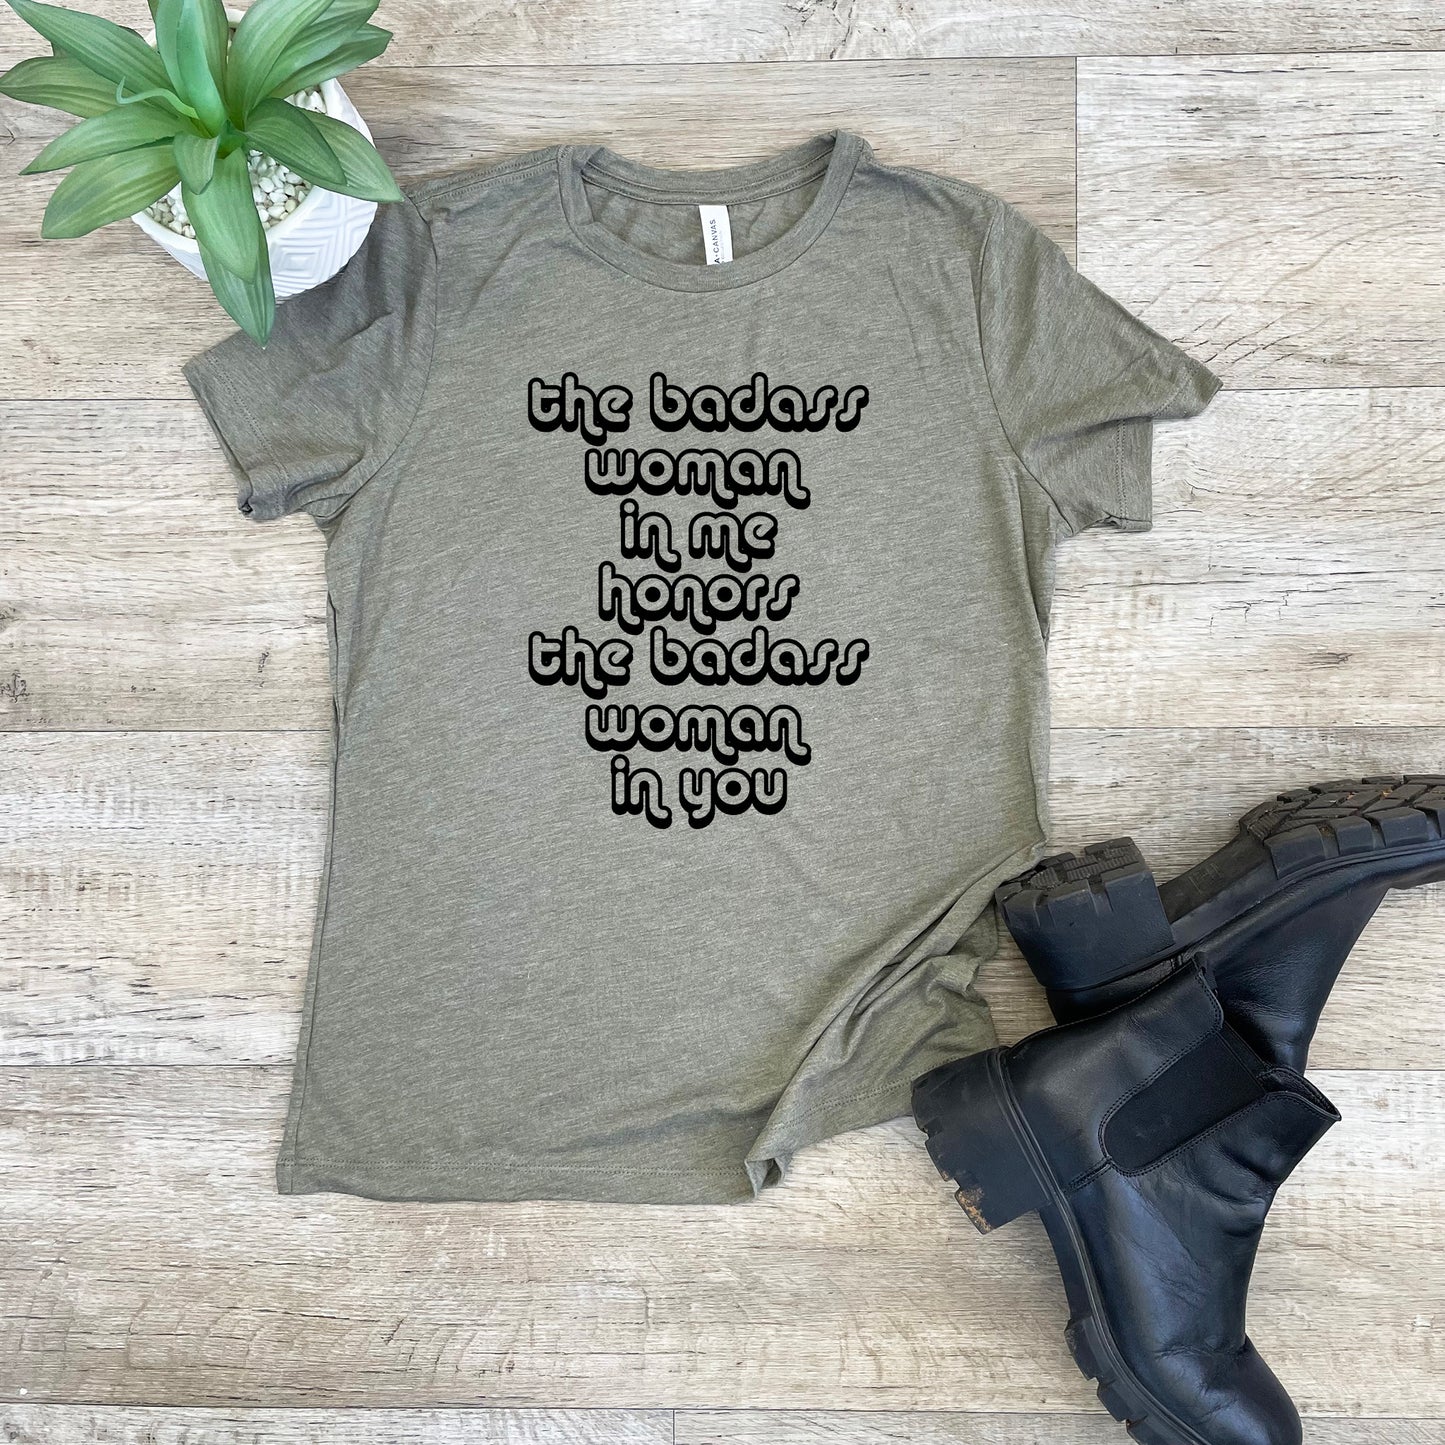 The Badass Woman in Me Honors the Badass Woman in You - Women's Crew Tee - Olive or Dusty Blue